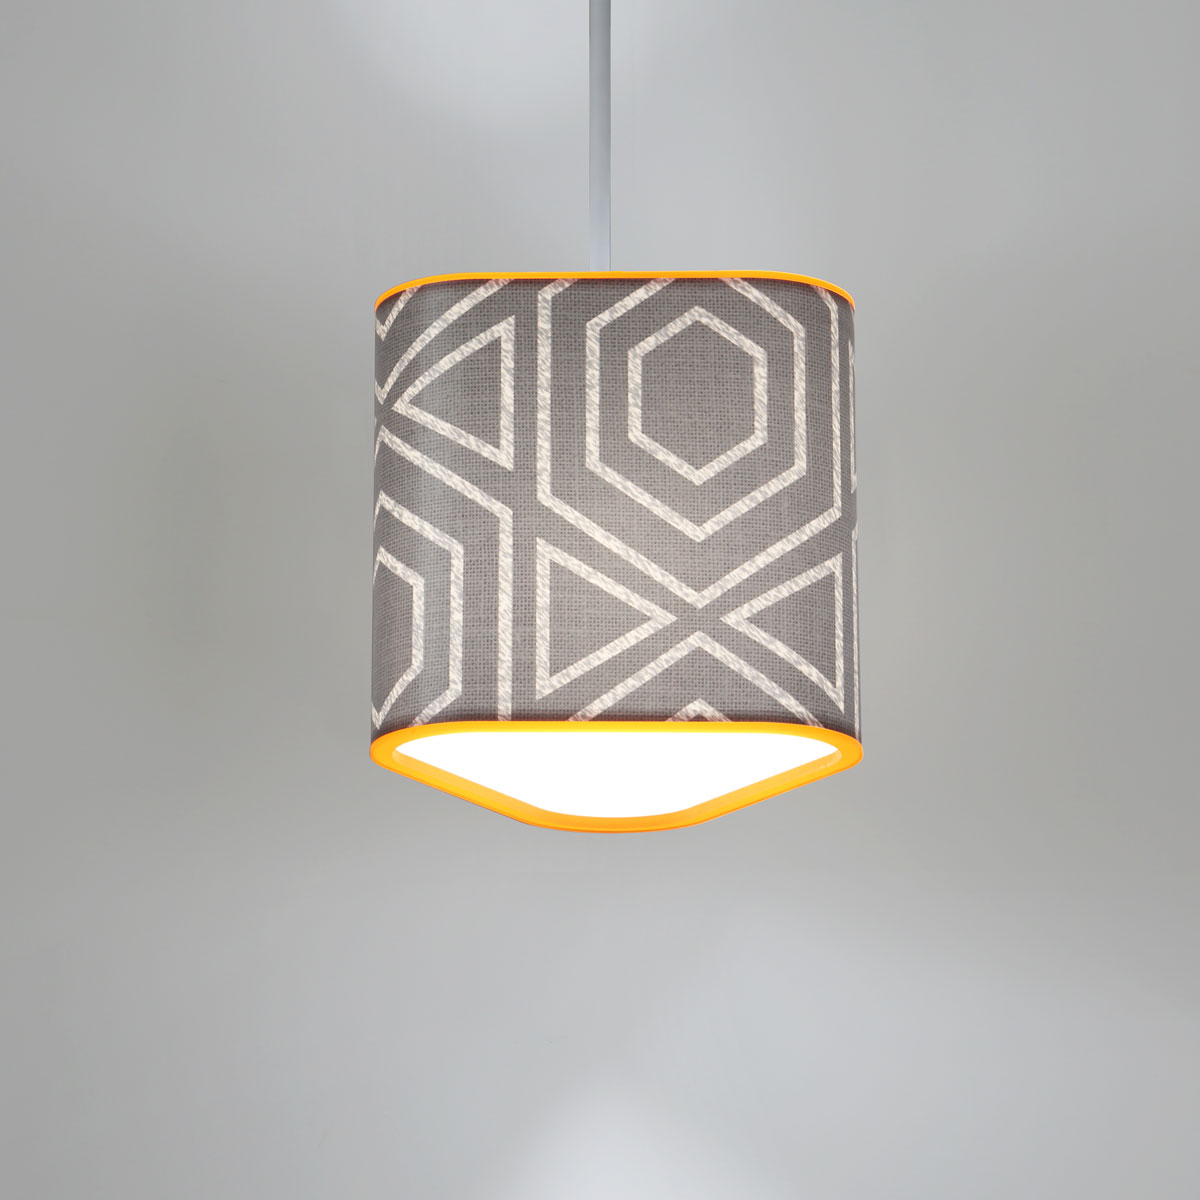 Stylish modern lighting with brilliant accent colors and distinctive geometric shapes; our Bright pendants offer modern elegance, perfect ambient illumination, and a flair for contemporary charm.